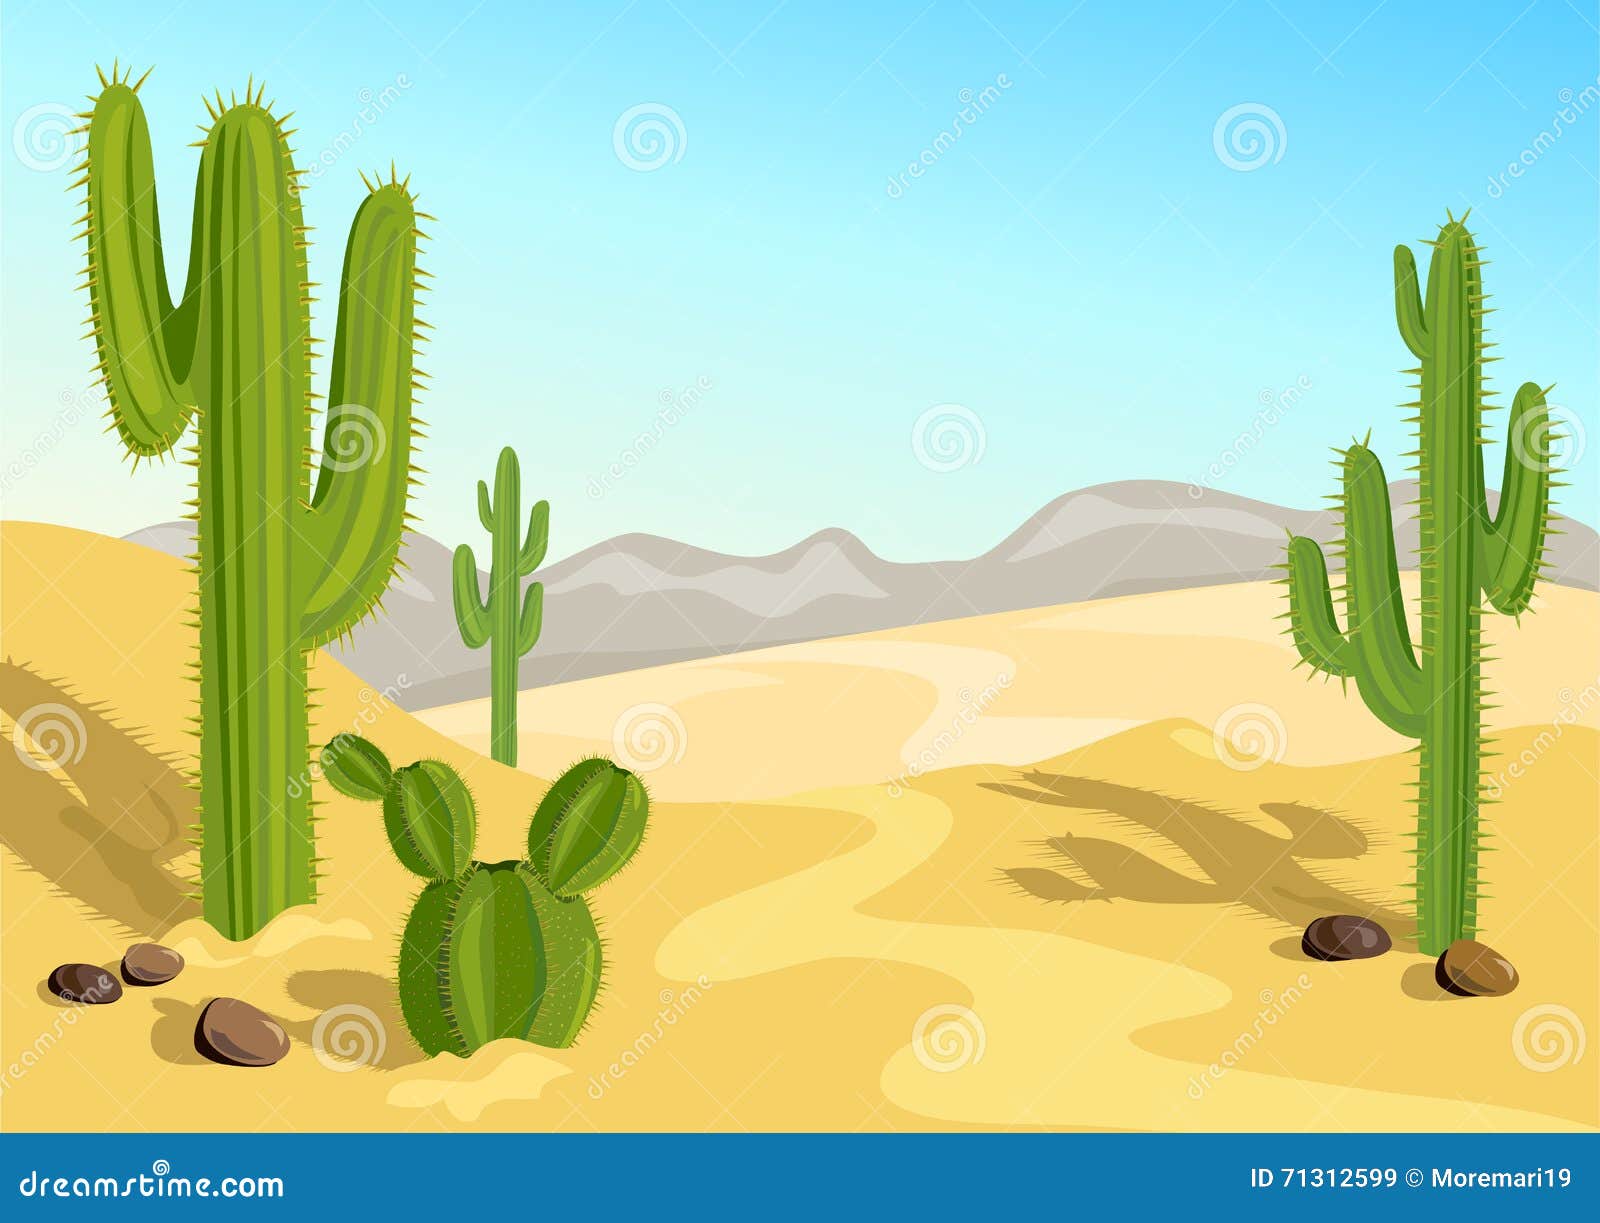 Cactus In The Desert Natural Background Stock Vector Illustration Of